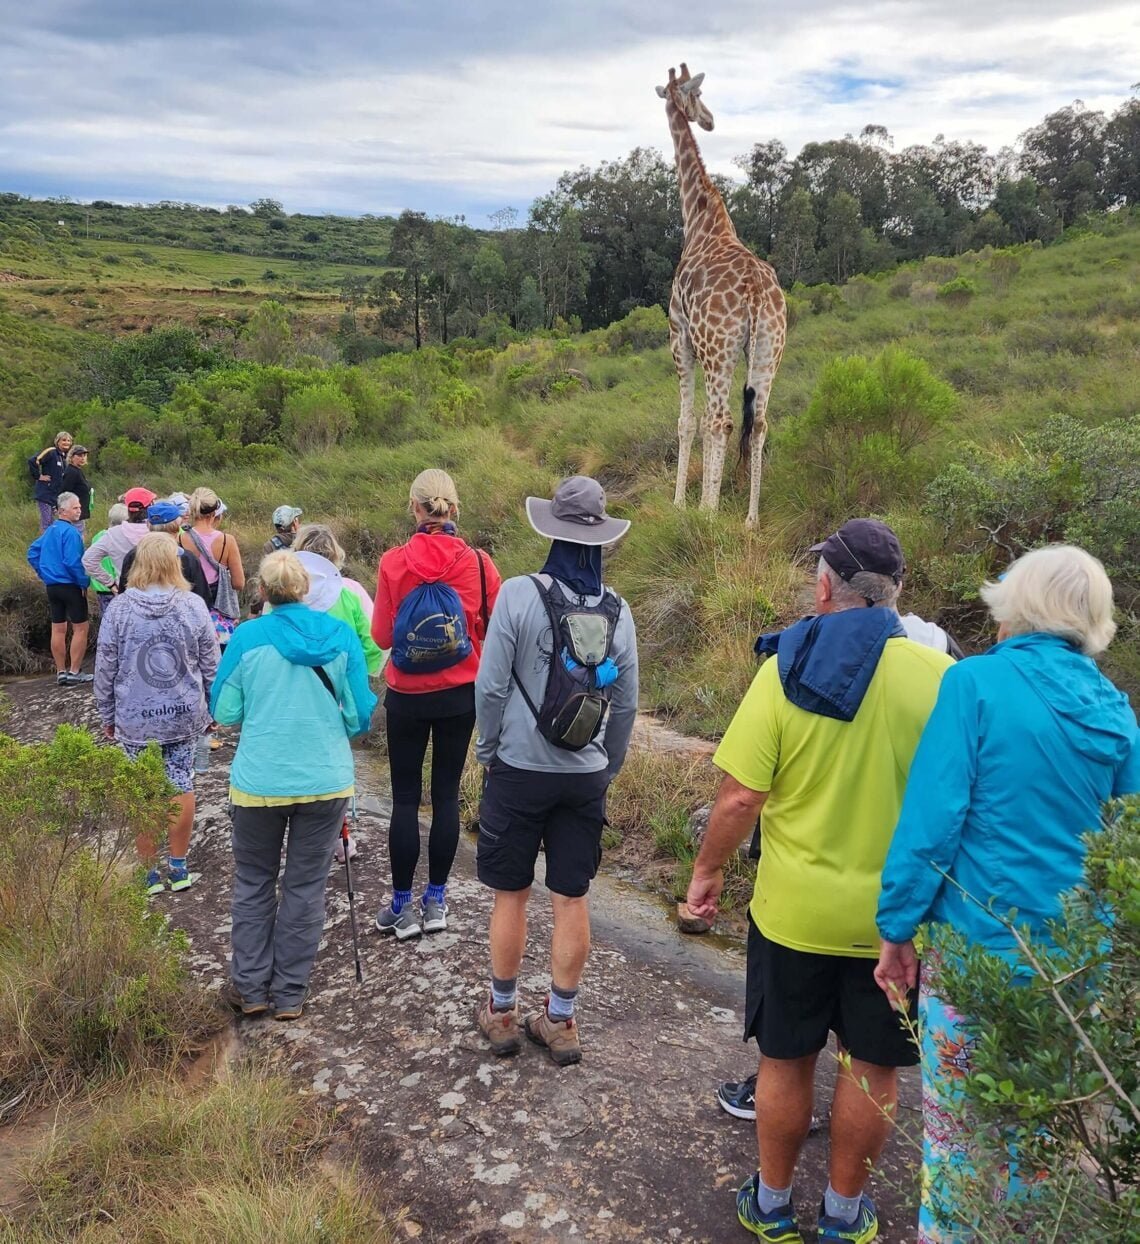 Wildlife Hiking Trails in the Eastern Cape